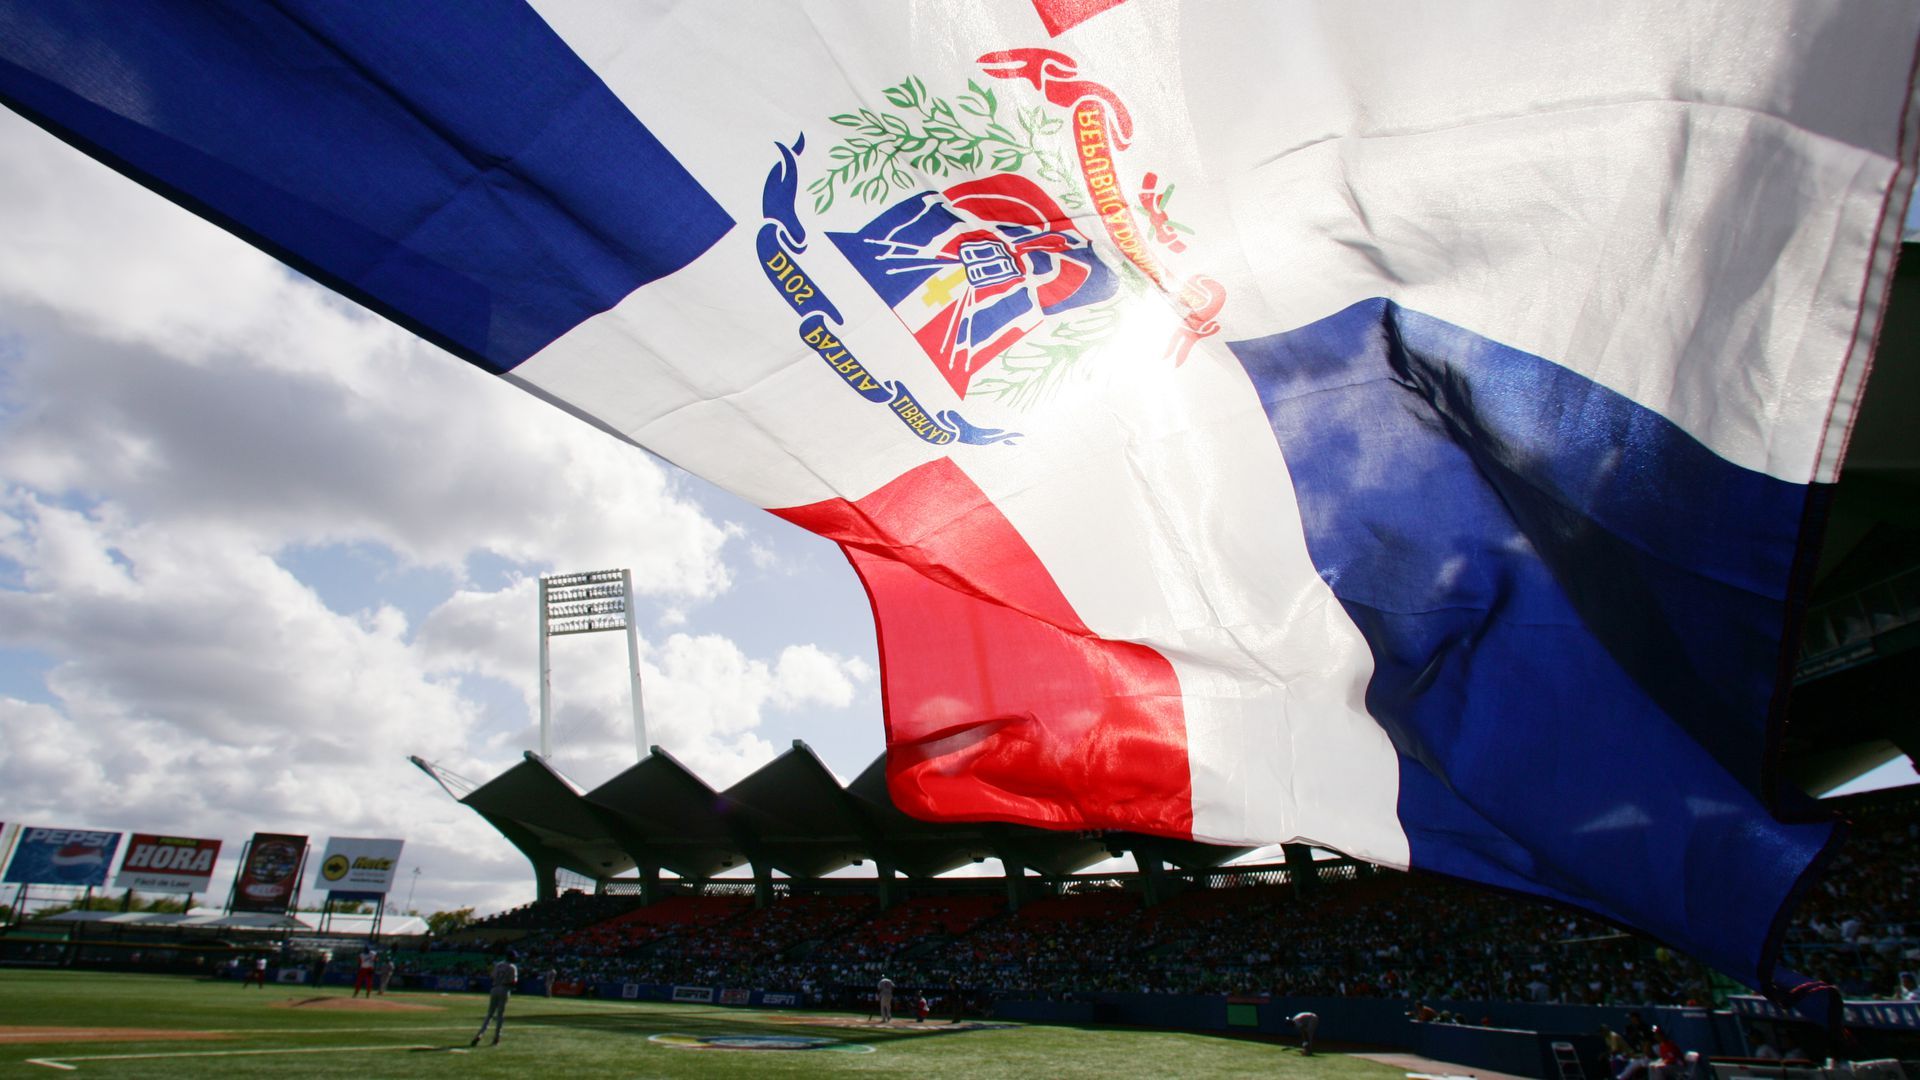 The flag of the Dominican Republic flies over a baseball field.